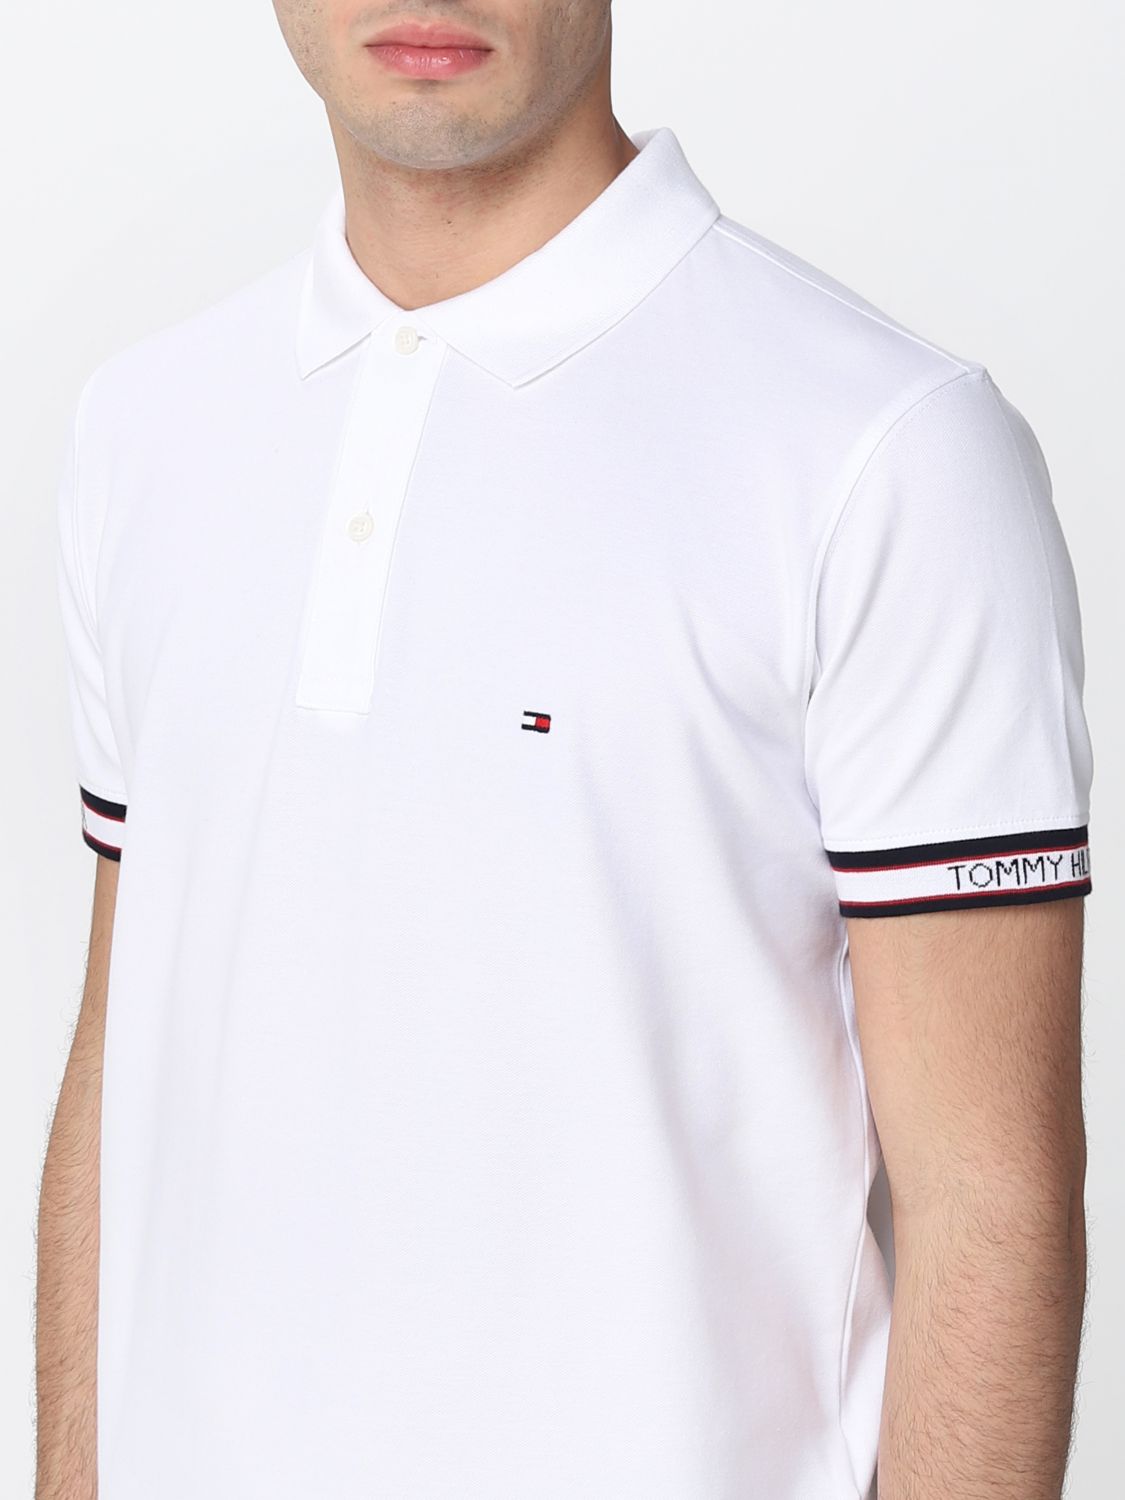 Mathis byrde Stor vrangforestilling Tommy Hilfiger Outlet: polo t-shirt - White | Tommy Hilfiger polo shirt  MW0MW23960 online on GIGLIO.COM